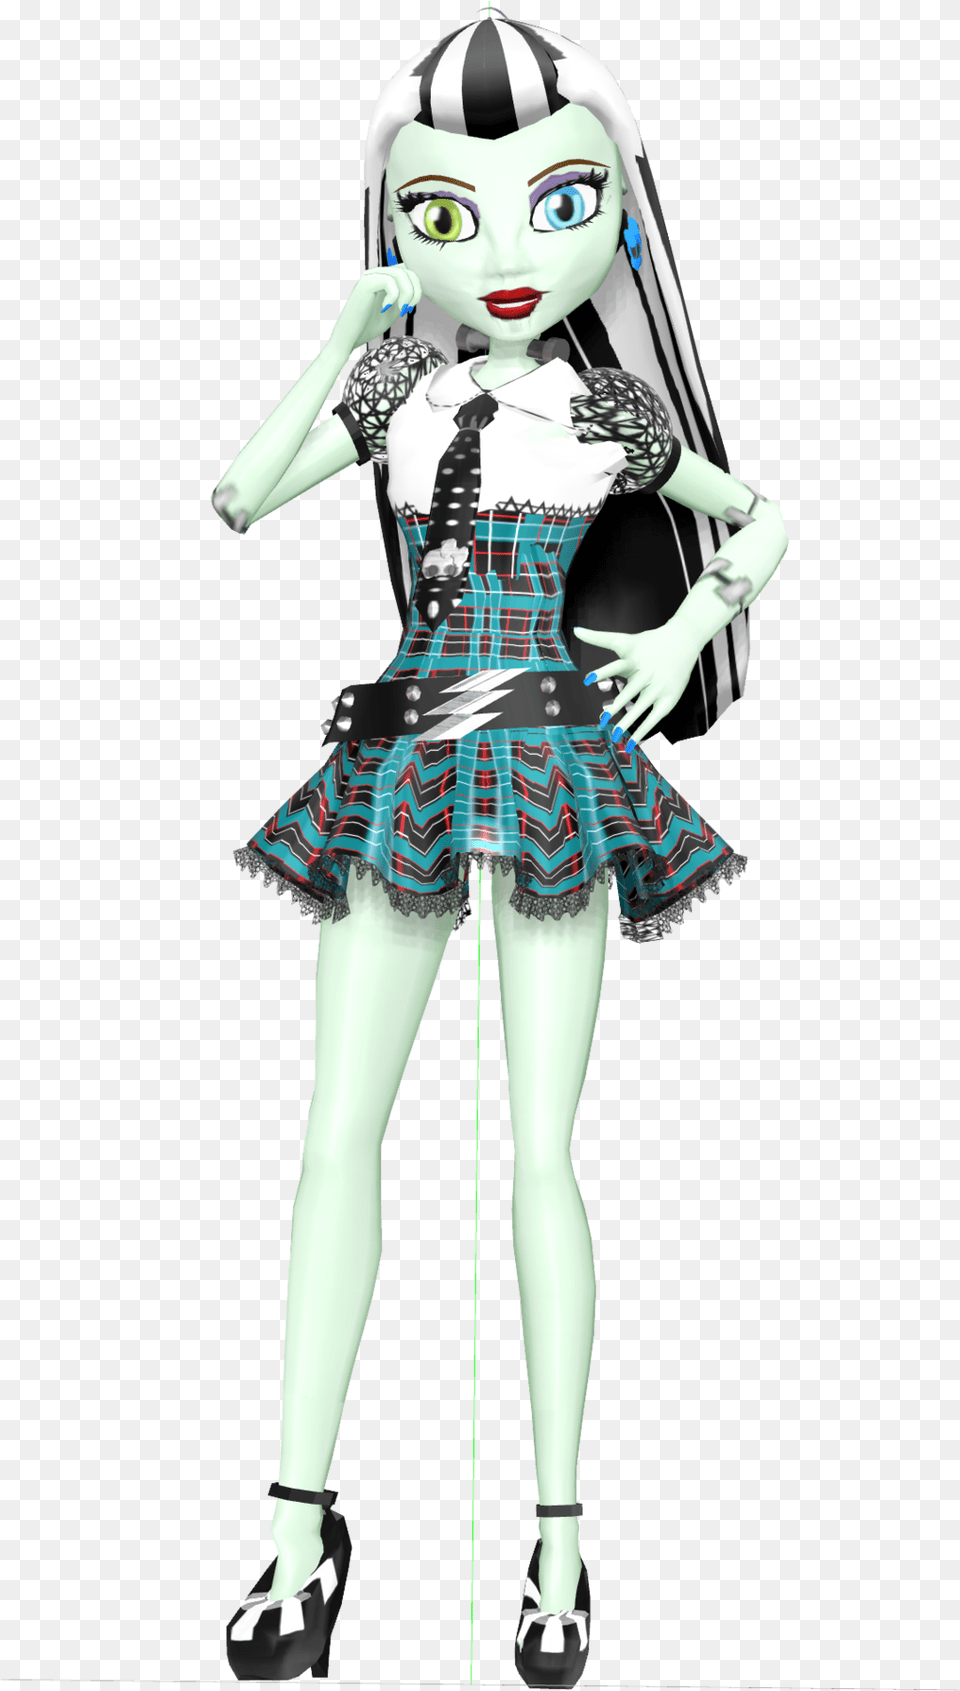 Frankie Monster High Hd Monster High Frankie Hd, Book, Comics, Person, Publication Png